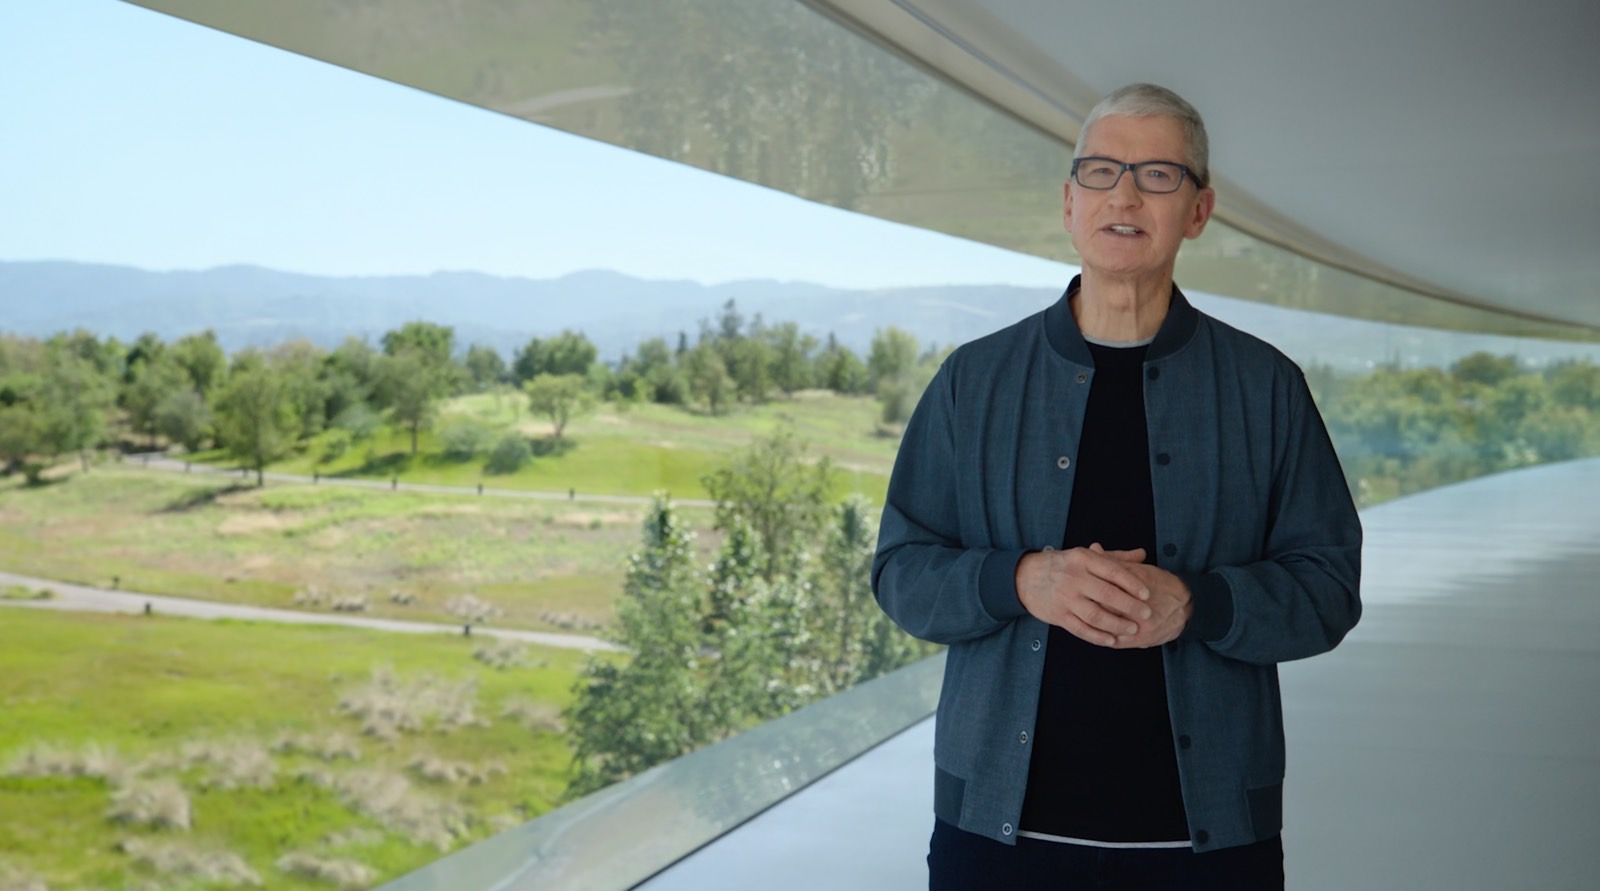 Apple eases COVID-19 policies; could this hint at an in-person WWDC?